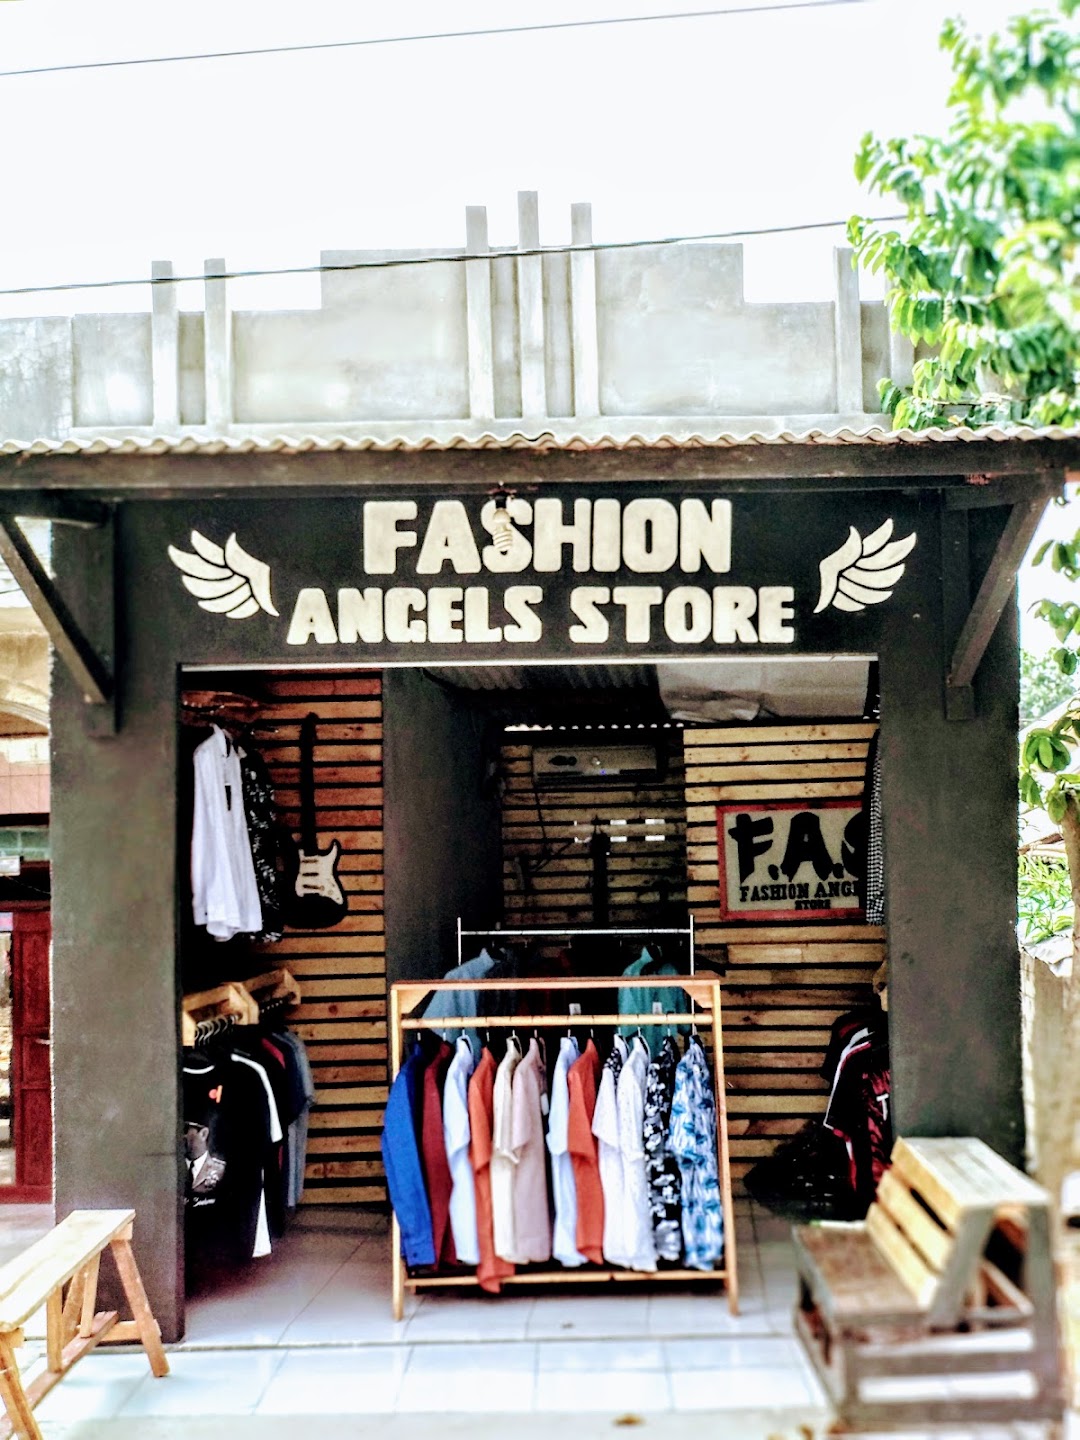 Fashion angels store (F.A.S)